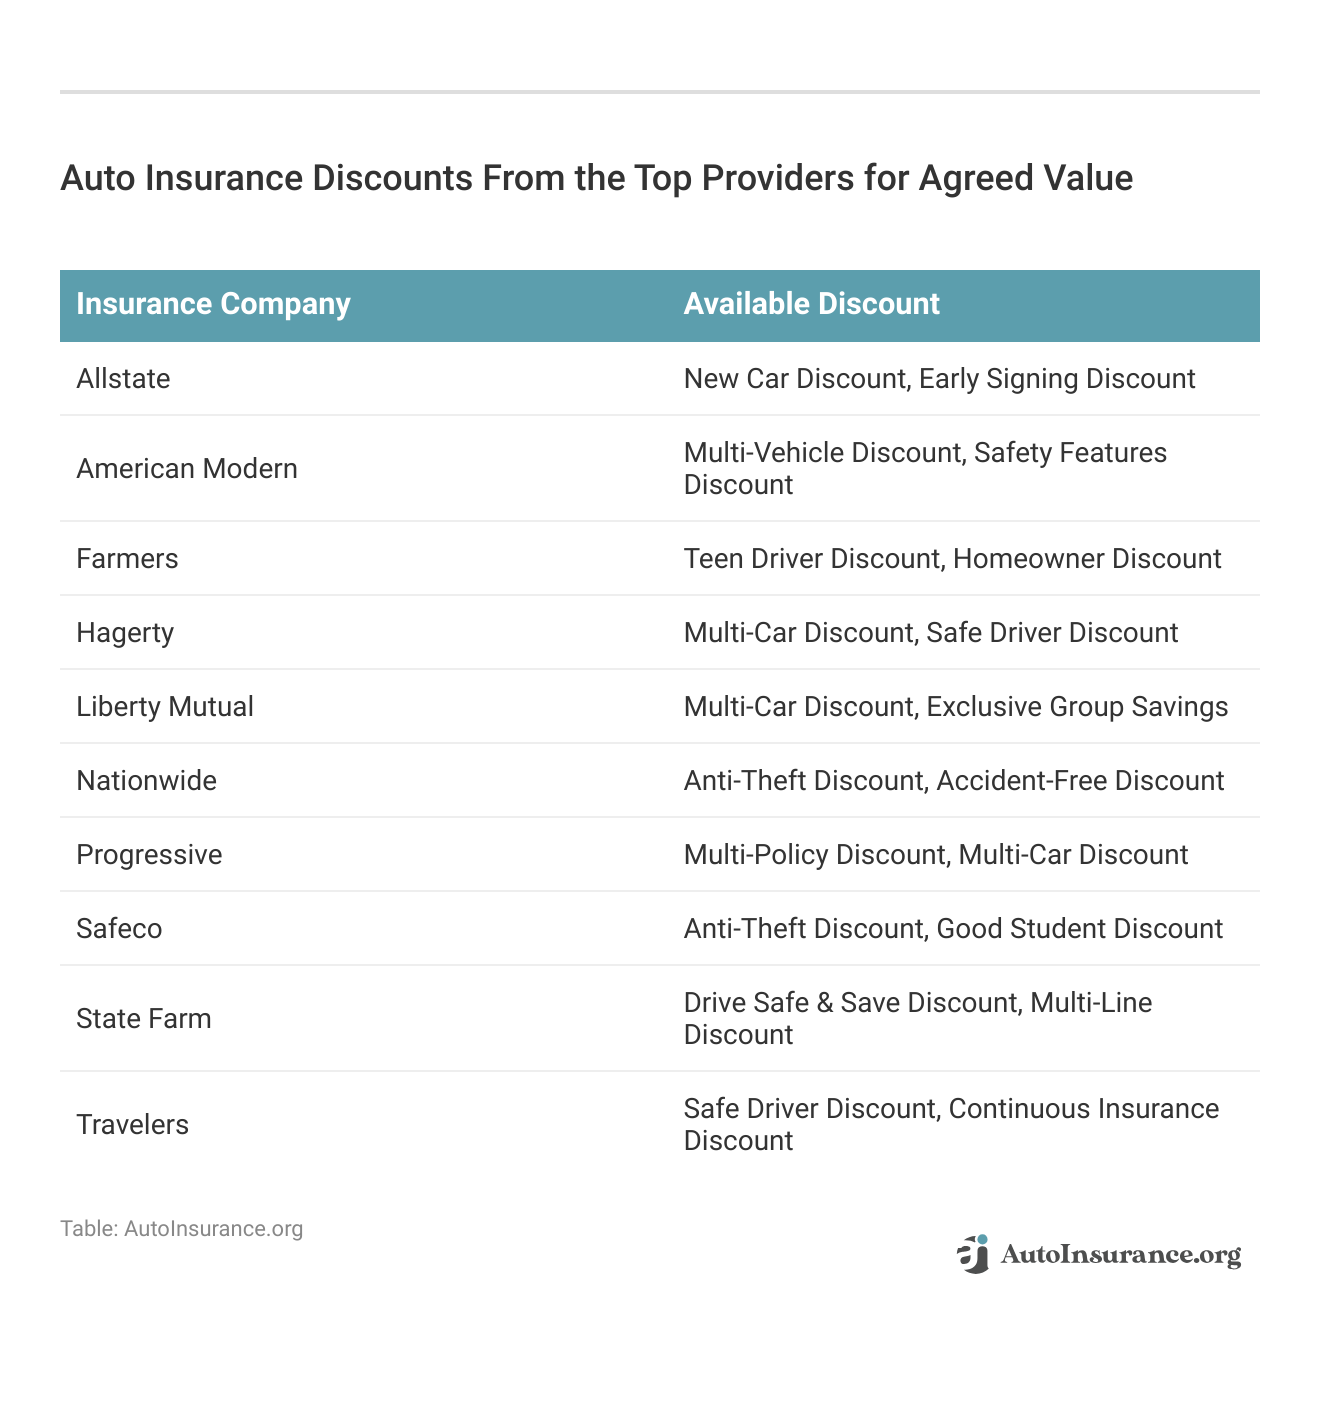 <h3>Auto Insurance Discounts From the Top Providers for Agreed Value</h3>